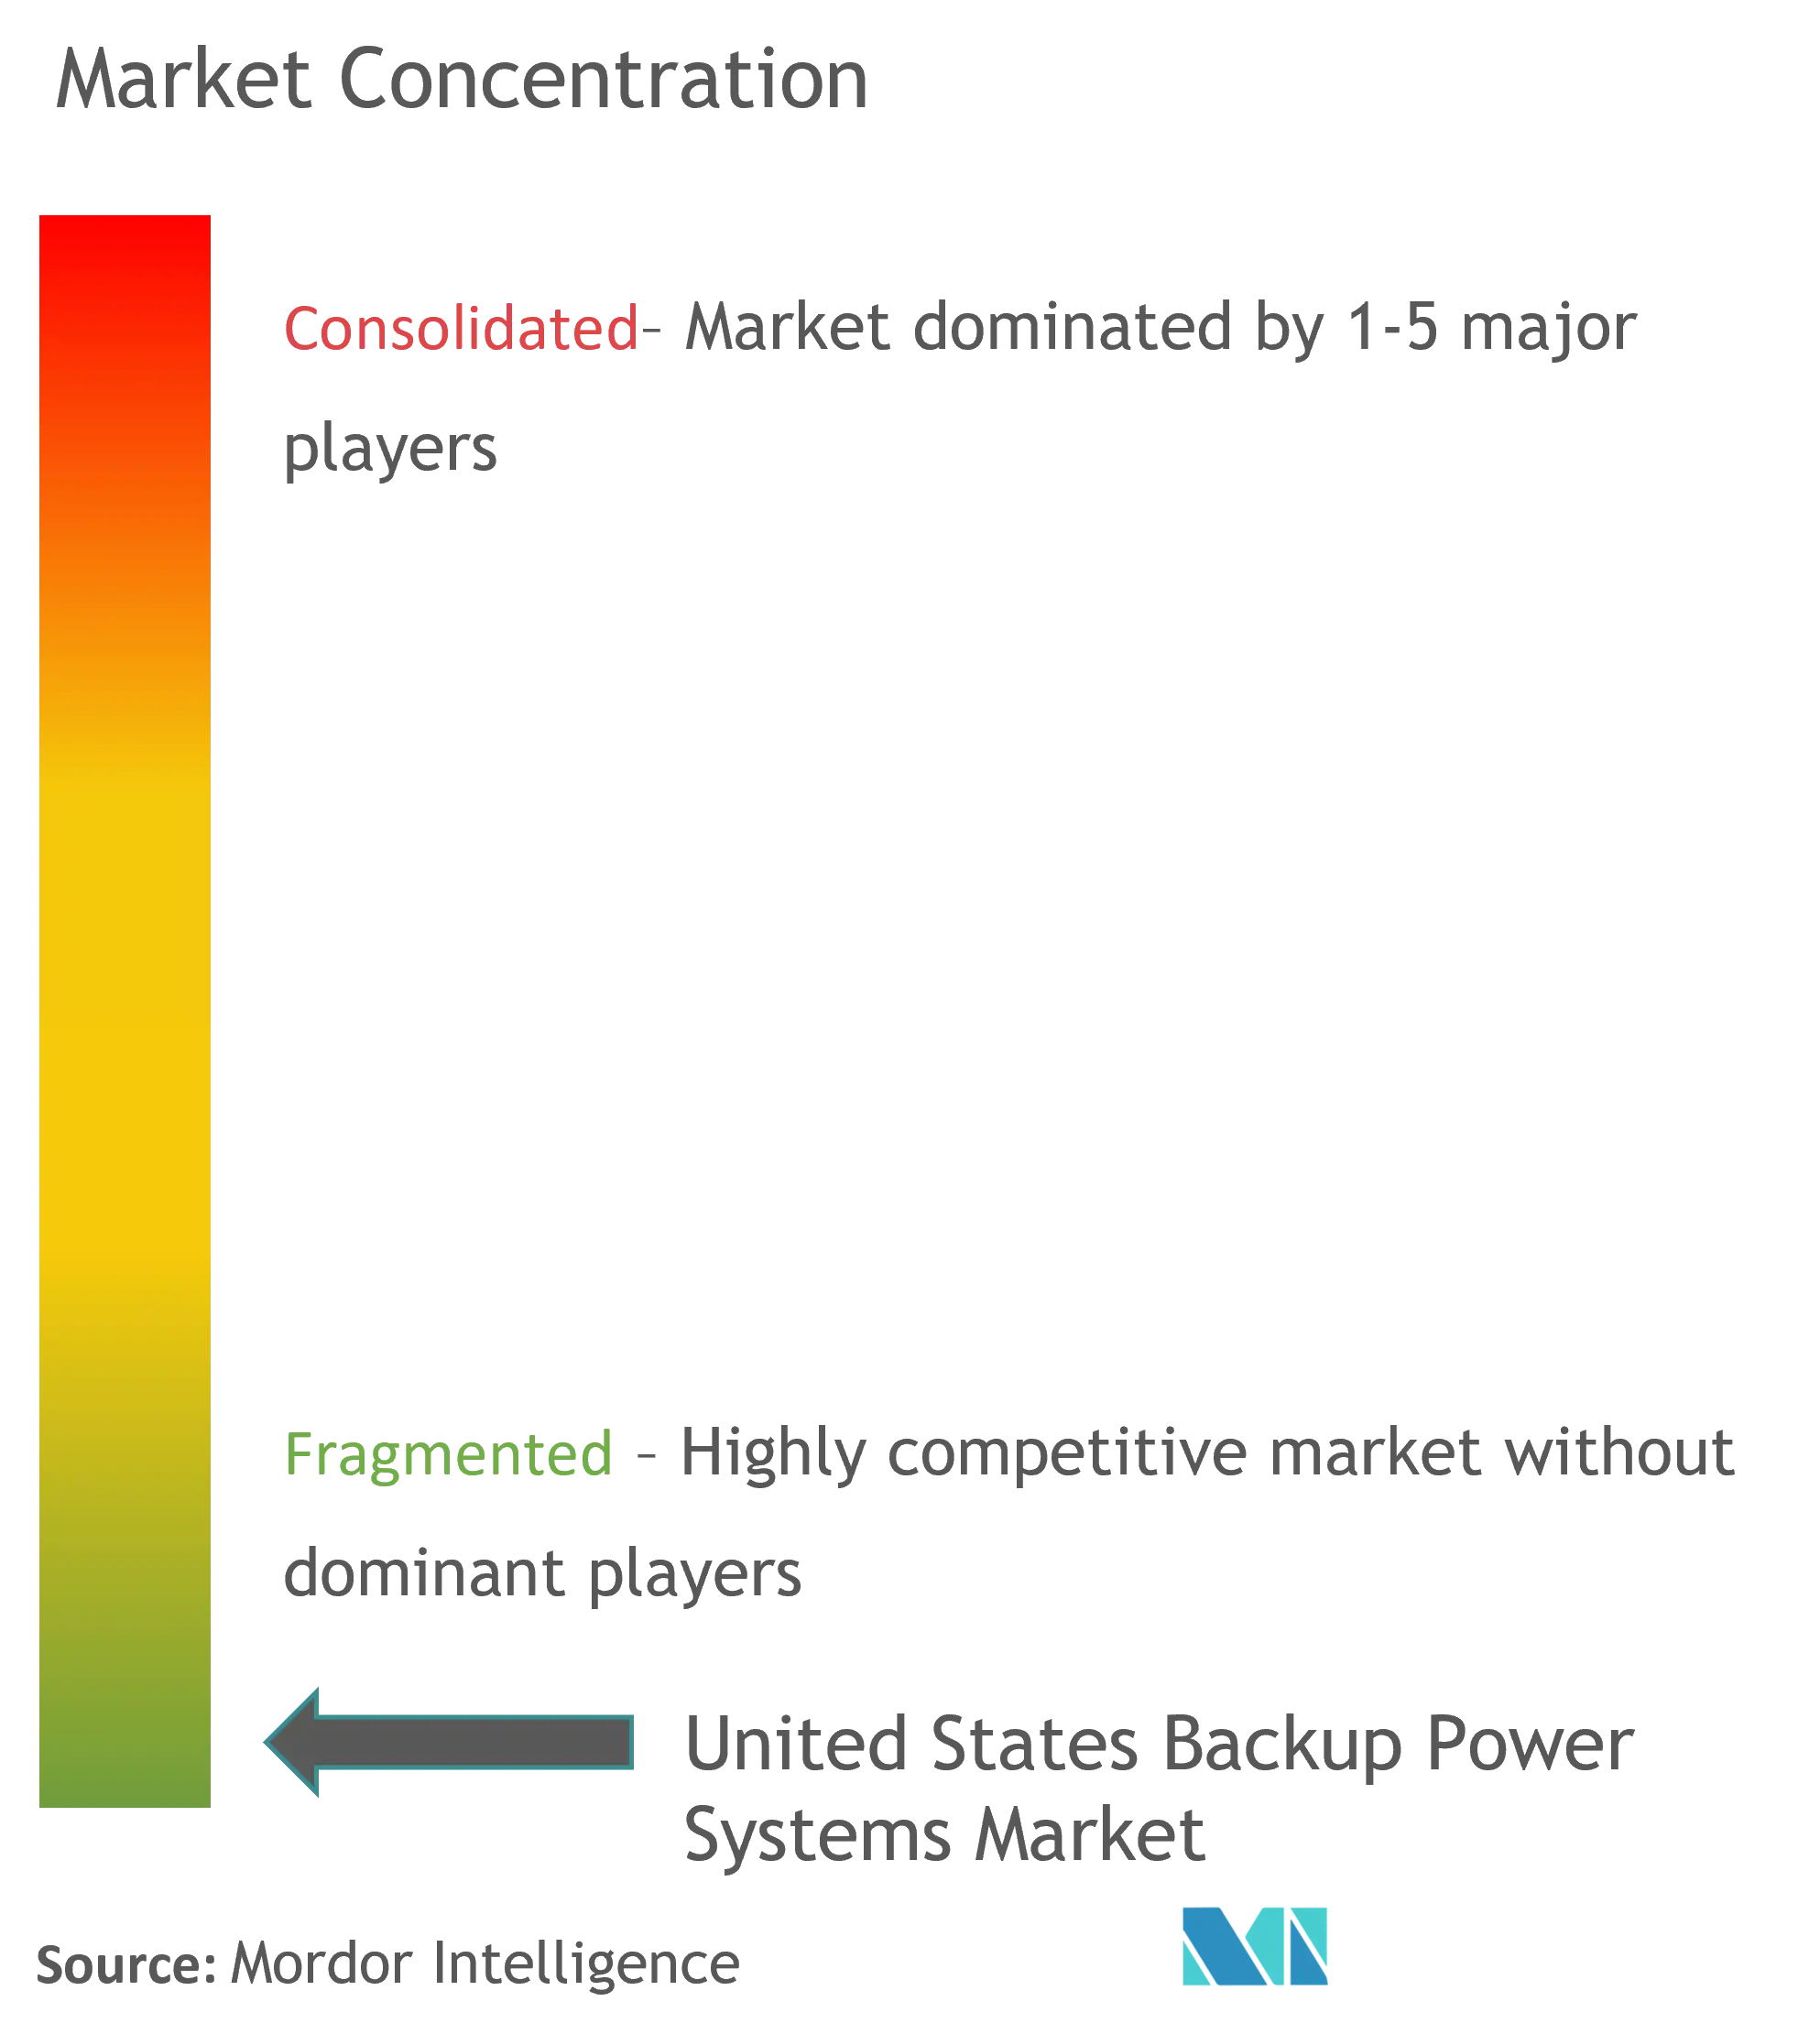 United States Backup Power Systems Market Concentration